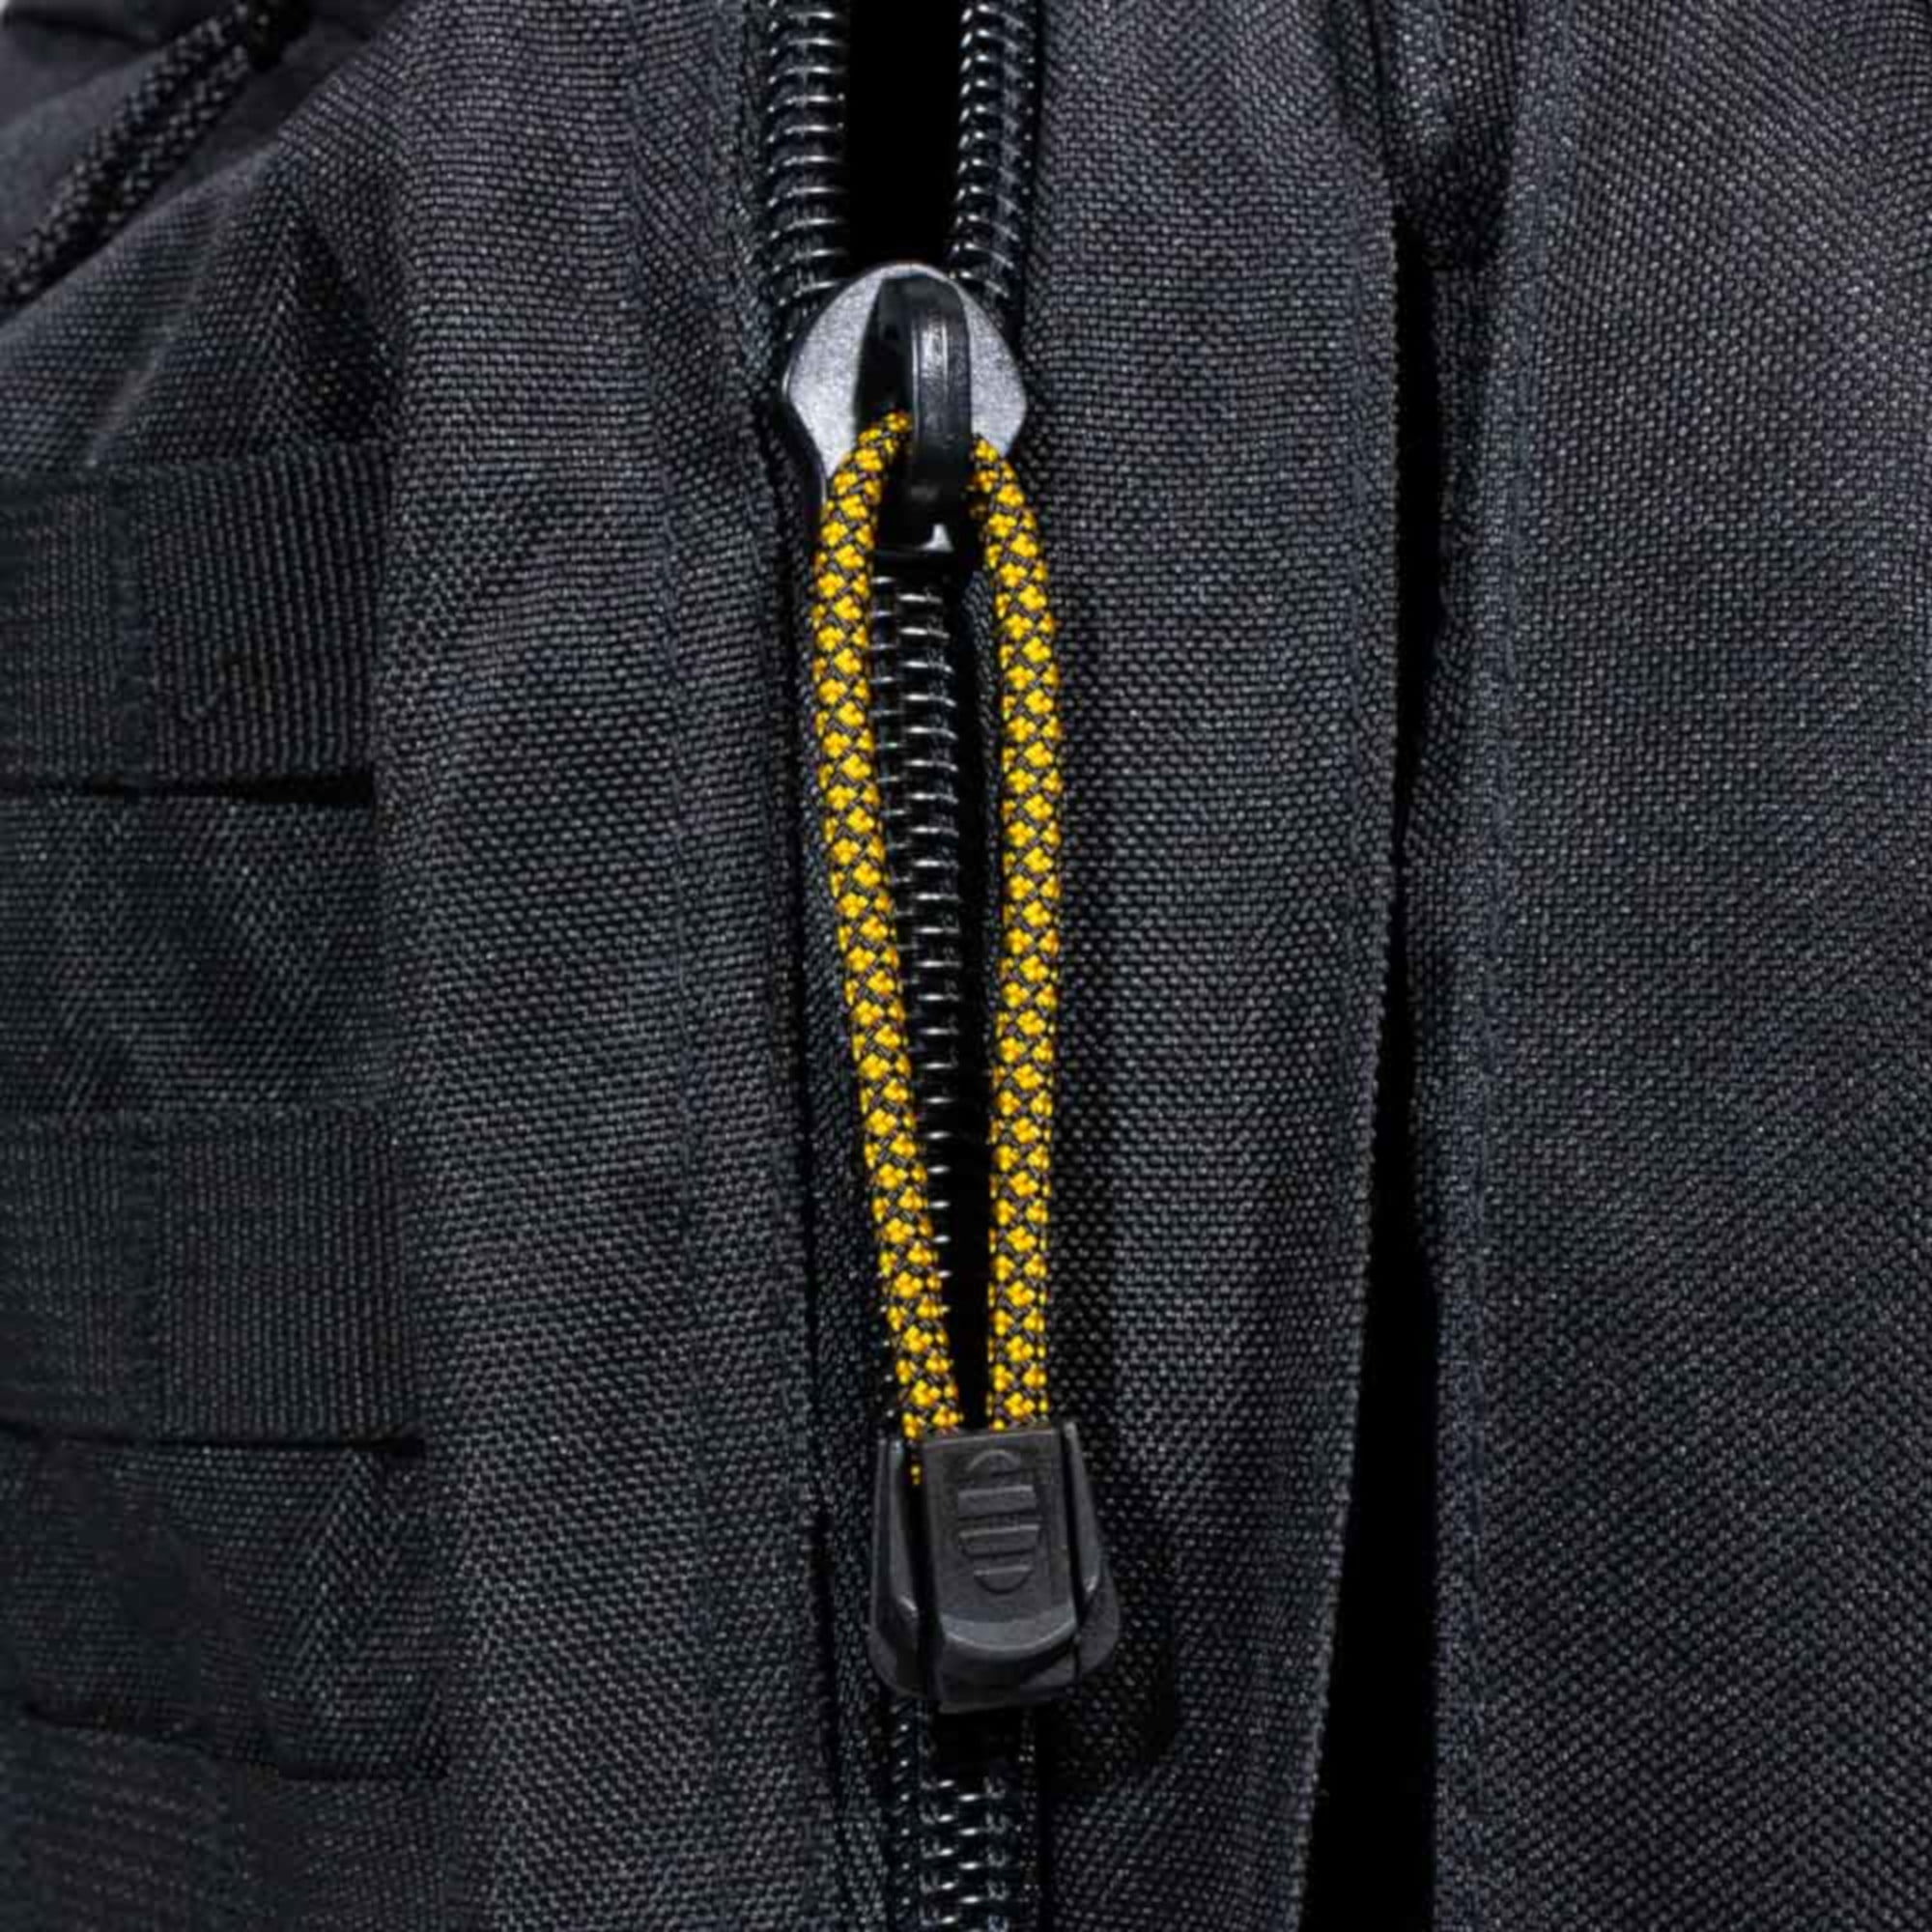 Zip Pulls Paracord Bright Yellow 4pack Suitcase Rucksack Backpack Uk Made Seller 